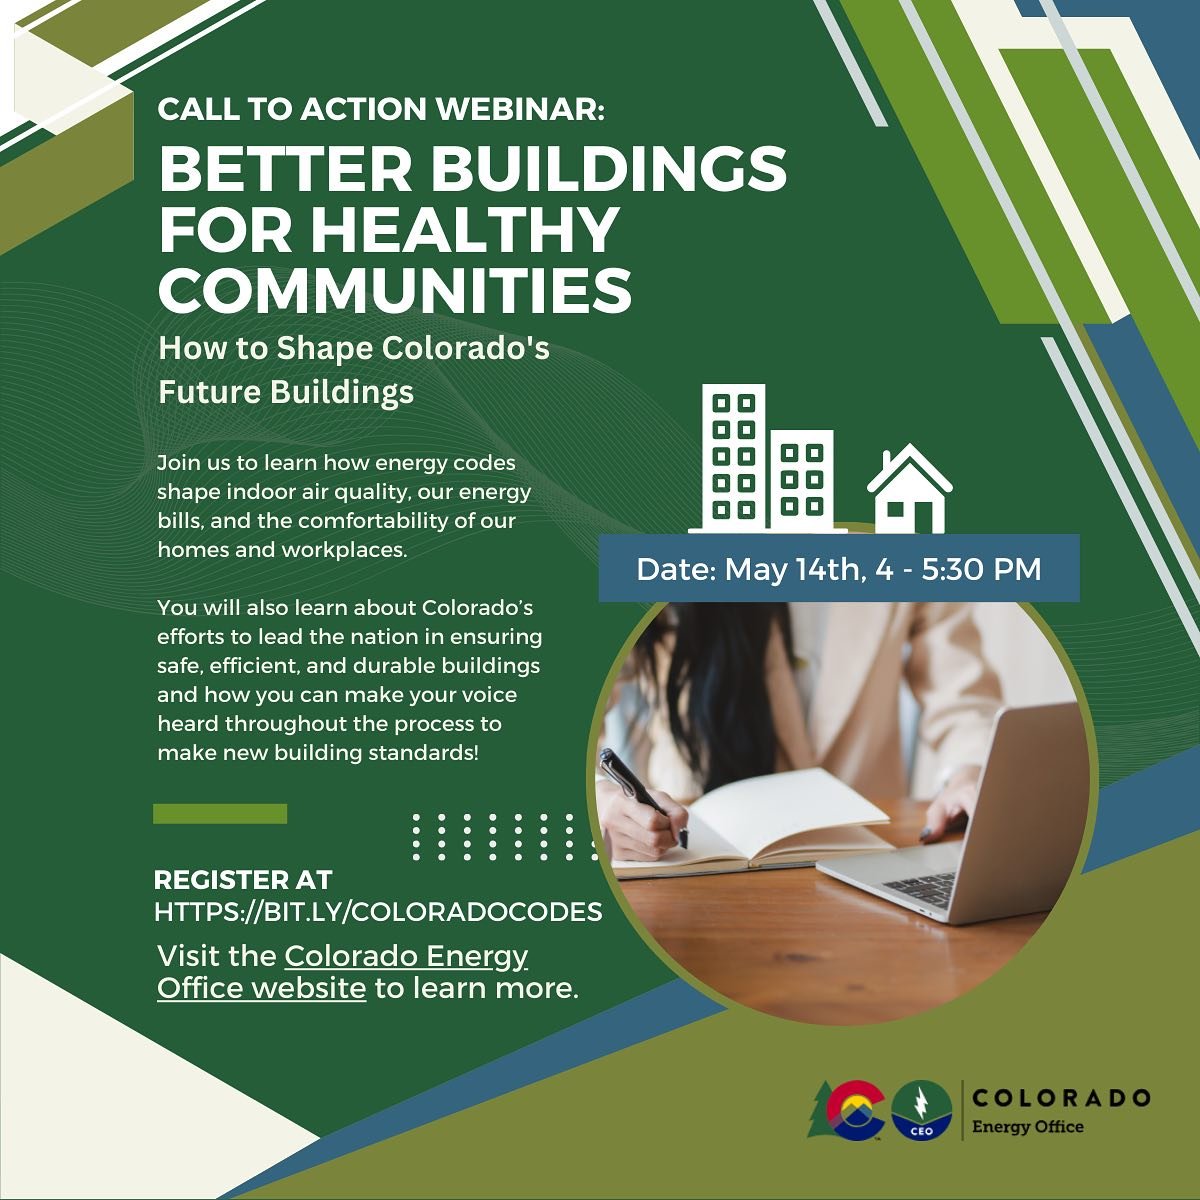 A great chance to learn about one of the best opportunities we have to 1) lower energy bills, 2) improve indoor air quality and comfort, and 3) reduce climate pollution from a major source of greenhouse gasses! Please register in the link in our bio 